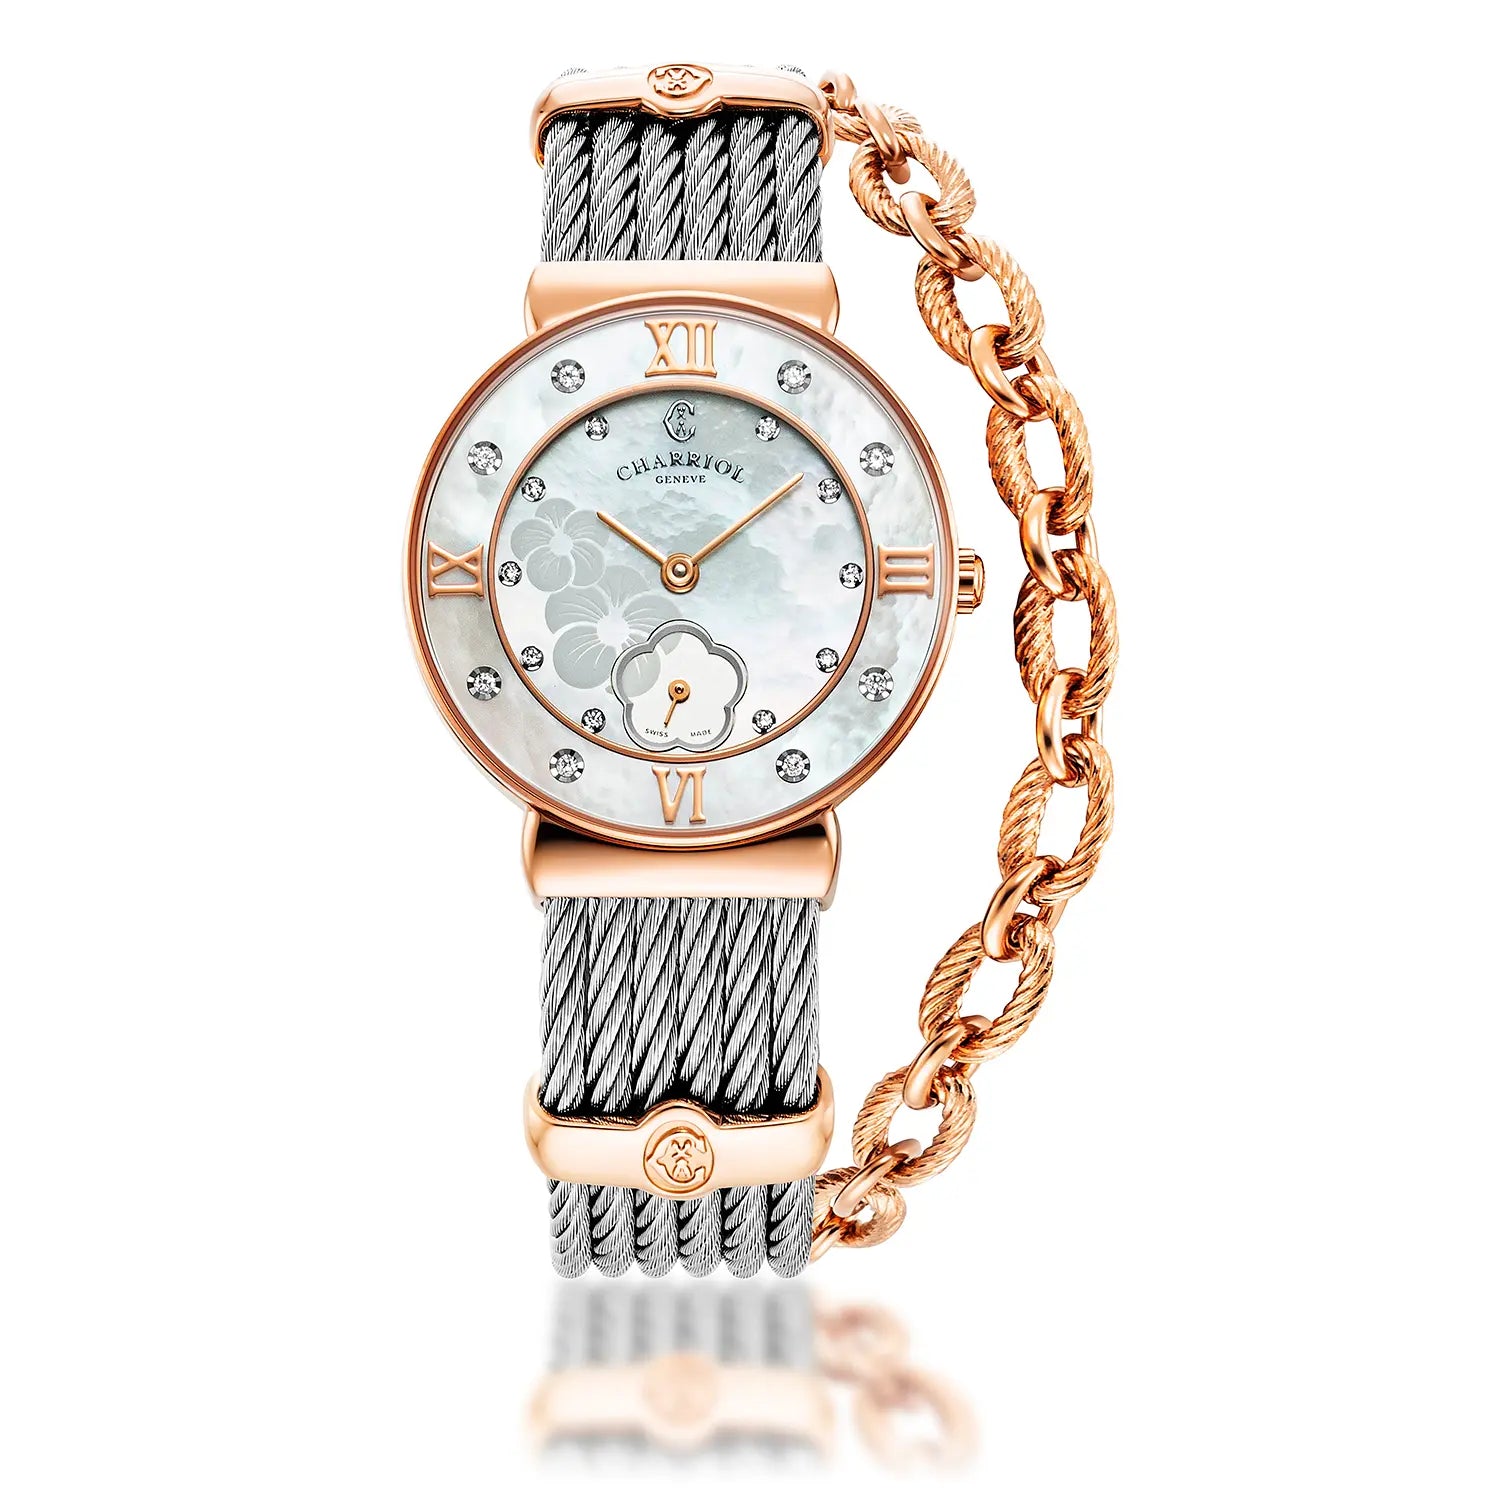 ST TROPEZ ICON, 30MM, QUARTZ CALIBRE, MOTHER-OF-PEARL HIBISCUS DIAL, MOTHER-OF-PEARL WITH 8 DIAMONDS BEZEL, STEEL CABLE BRACELET - Charriol Geneve -  Watch